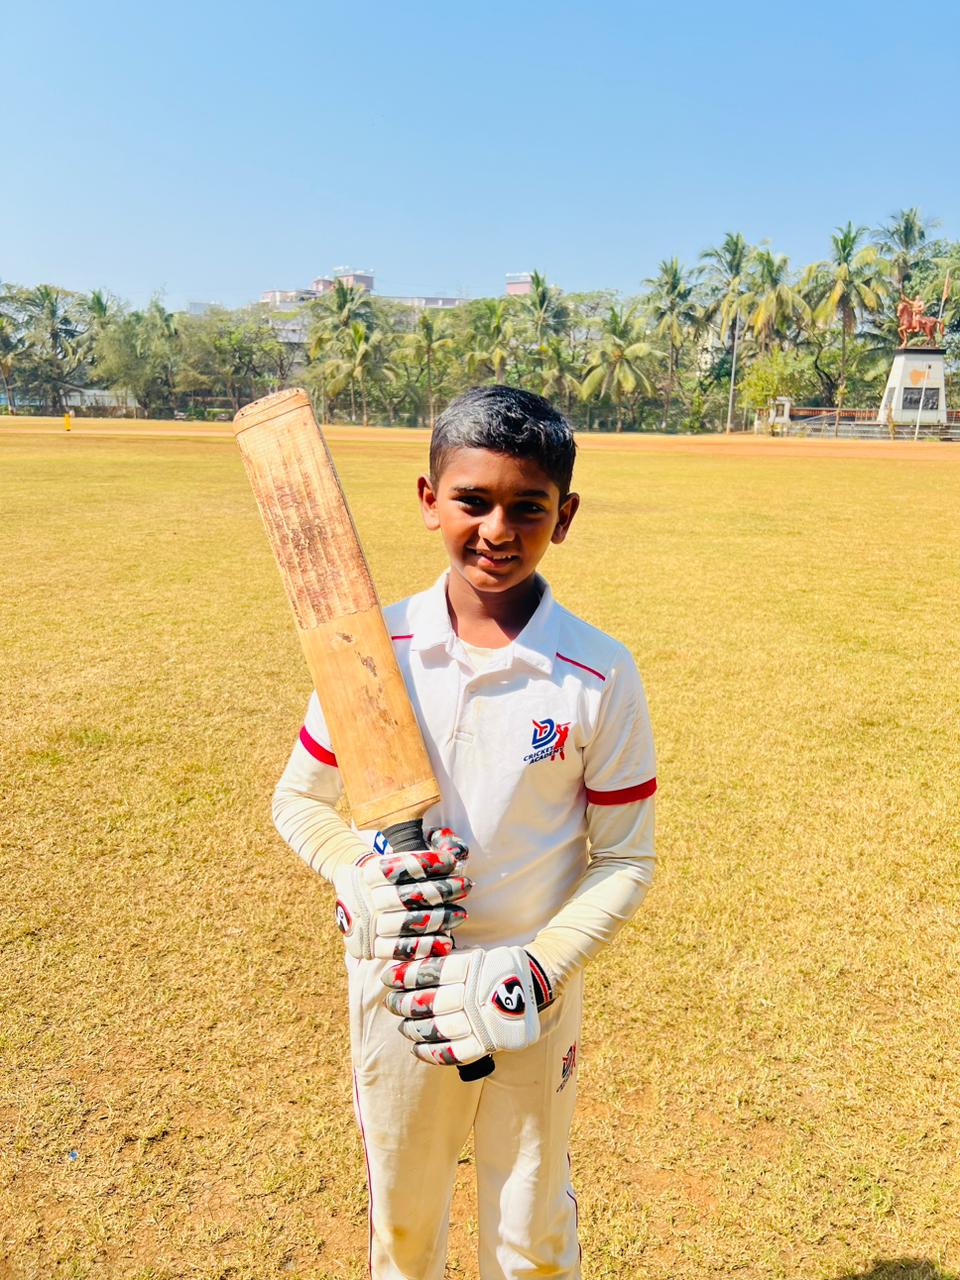 advait kekan from DY Cricket Academy